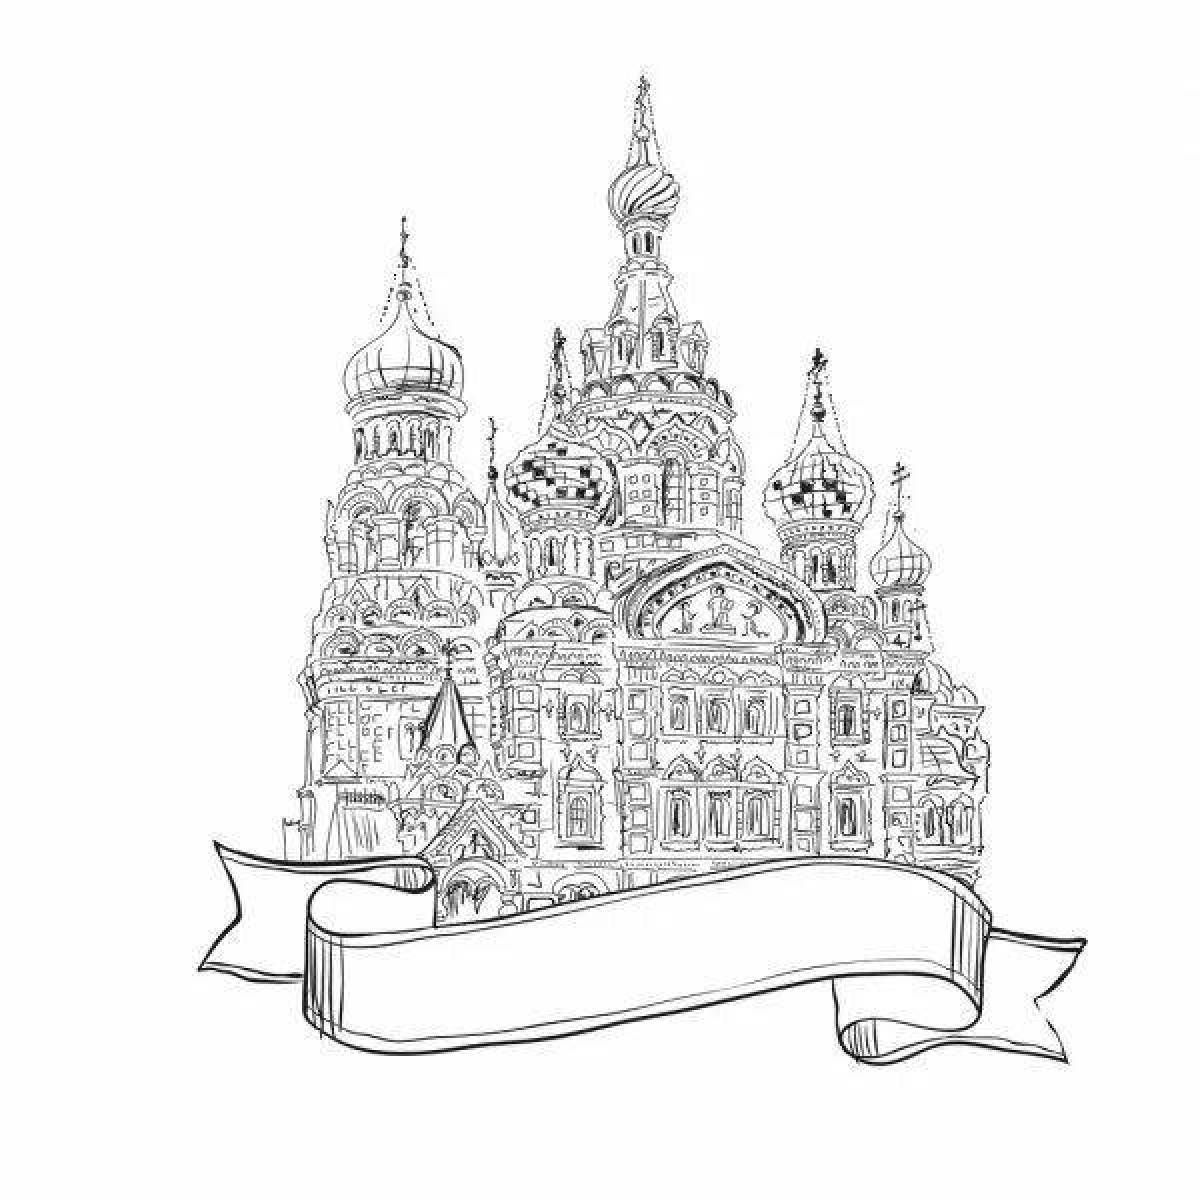 Exquisite savior on spilled blood coloring page